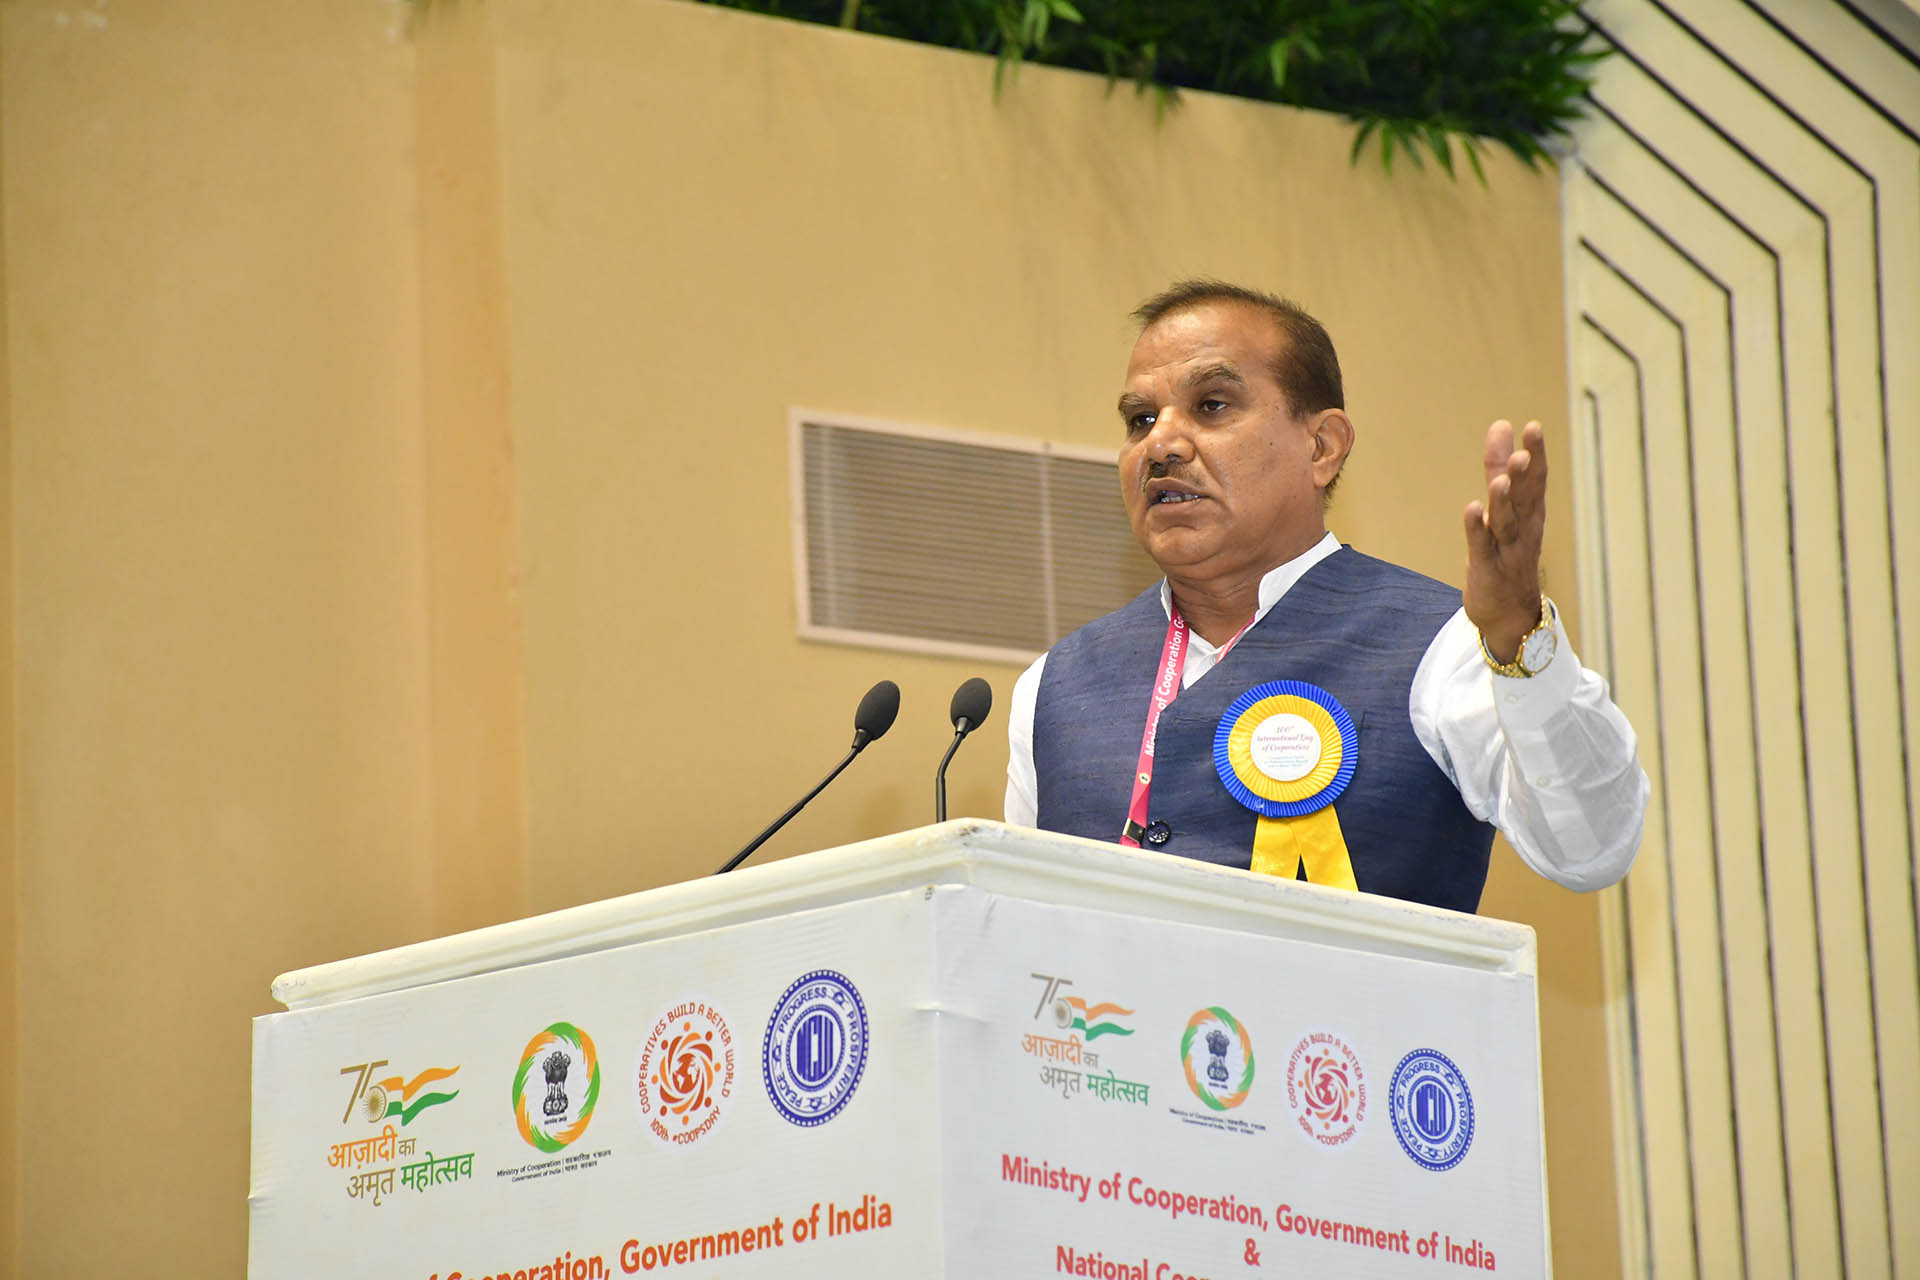 Greetings by Dr. Chandrapal Singh Yadav, President, International Cooperative Alliance - Asia Pacific on the 100th International Day of Cooperatives